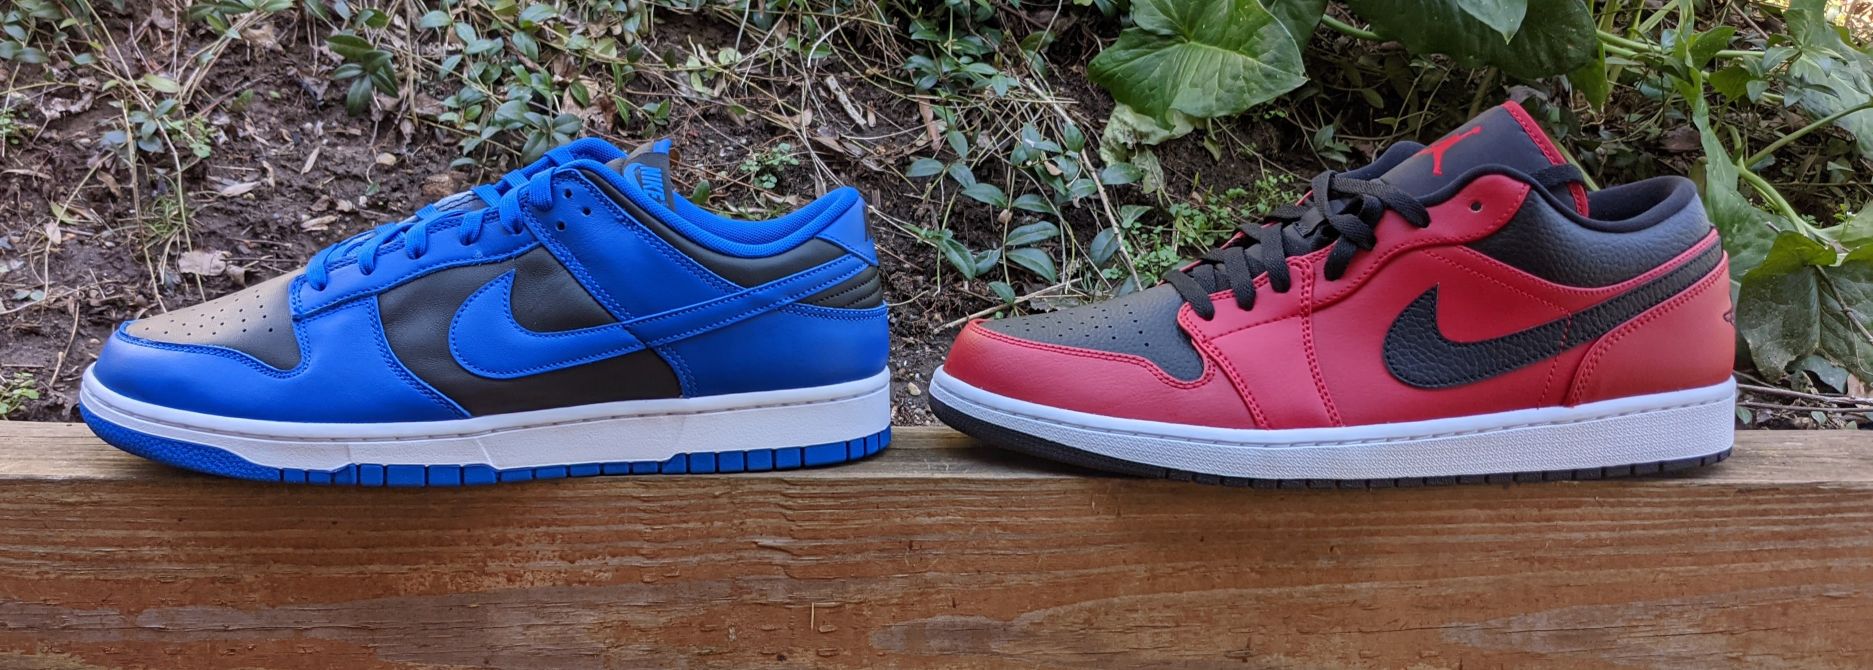 Jordan 1 Low vs. Dunk Low: What’s the Difference?